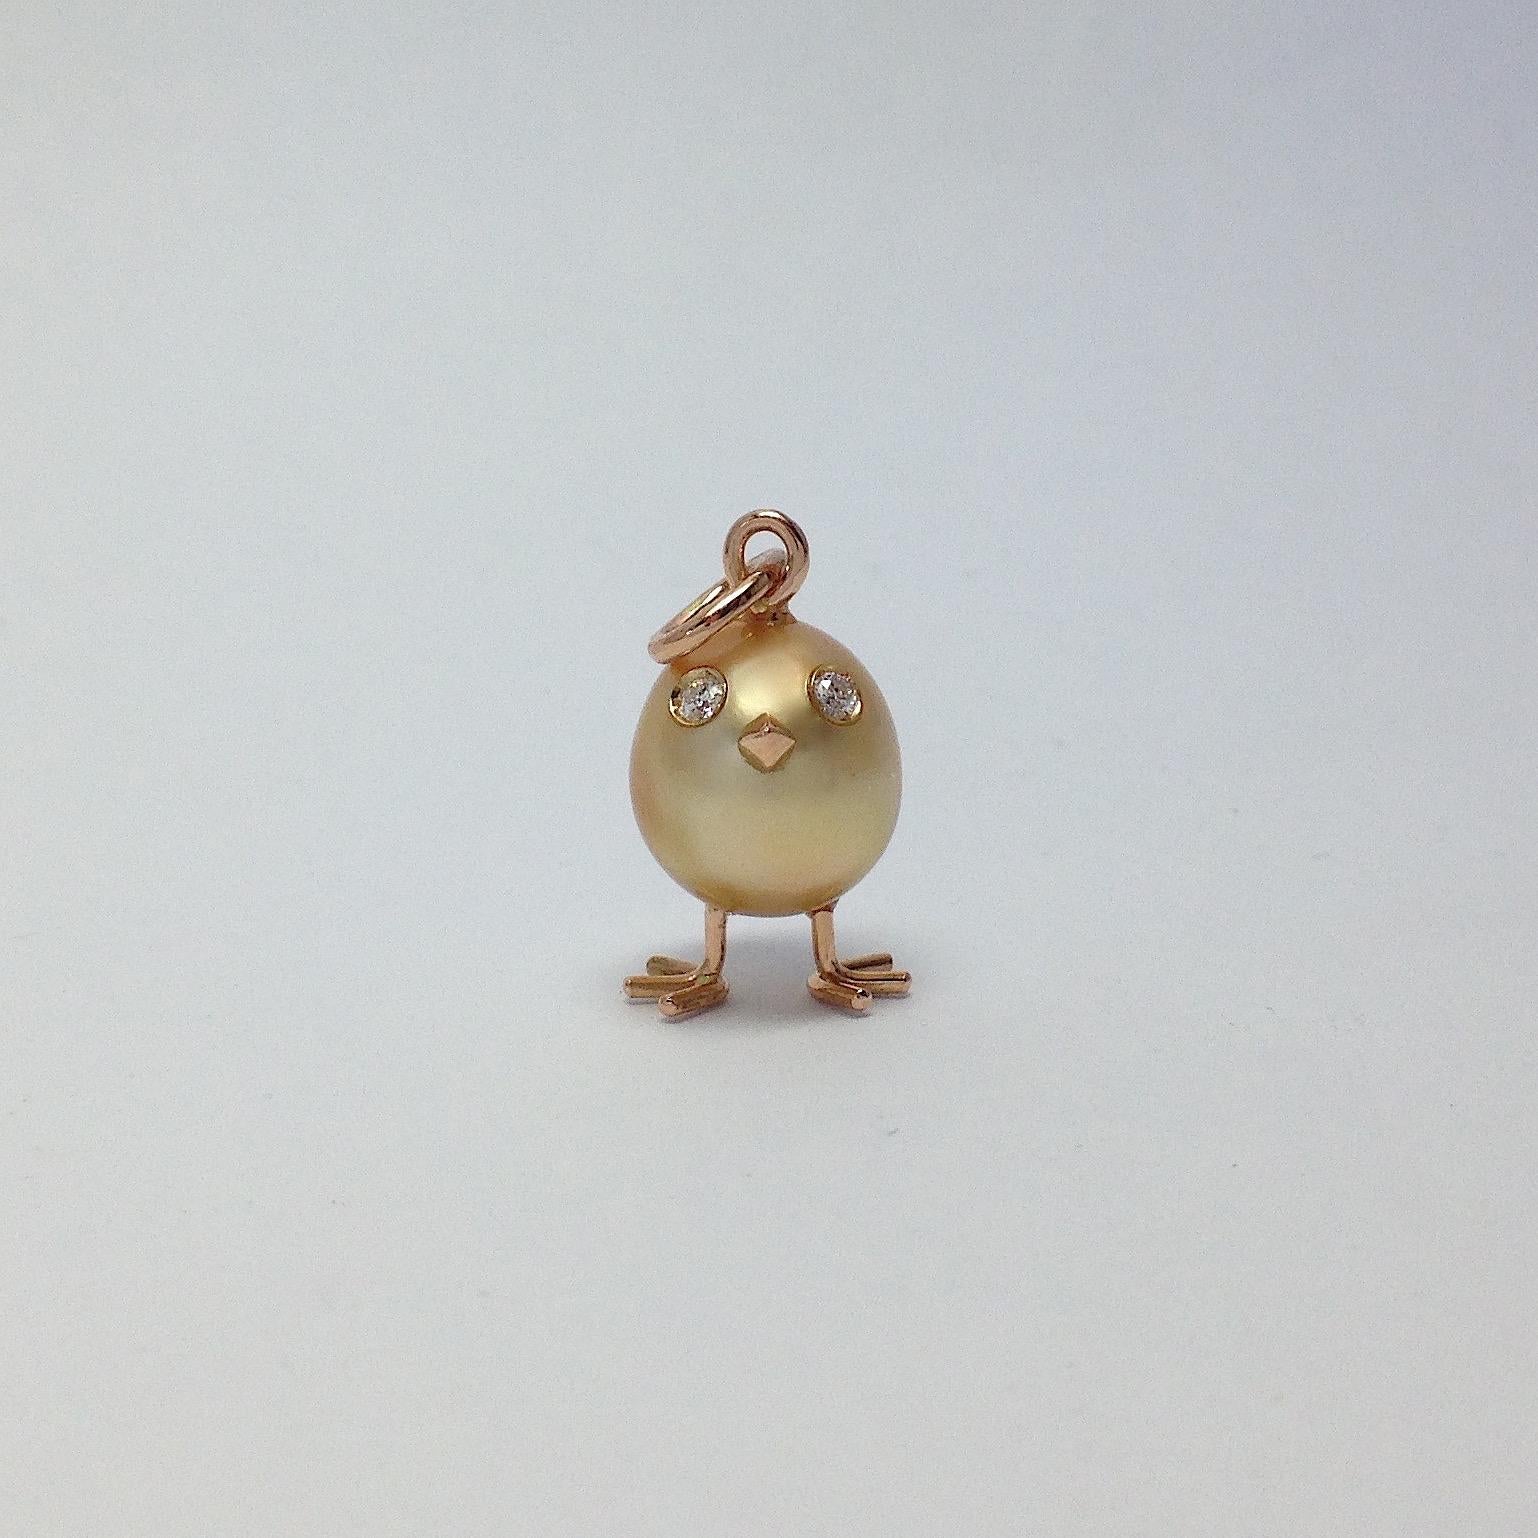 A oval shape Australian pearl has been carefully crafted to make a chick. He has his two legs, two eyes encrusted with two white diamonds and his beak. 
The gold is red.
The chain is not included
The total caliber is ct 0.04.
The size of pearl is